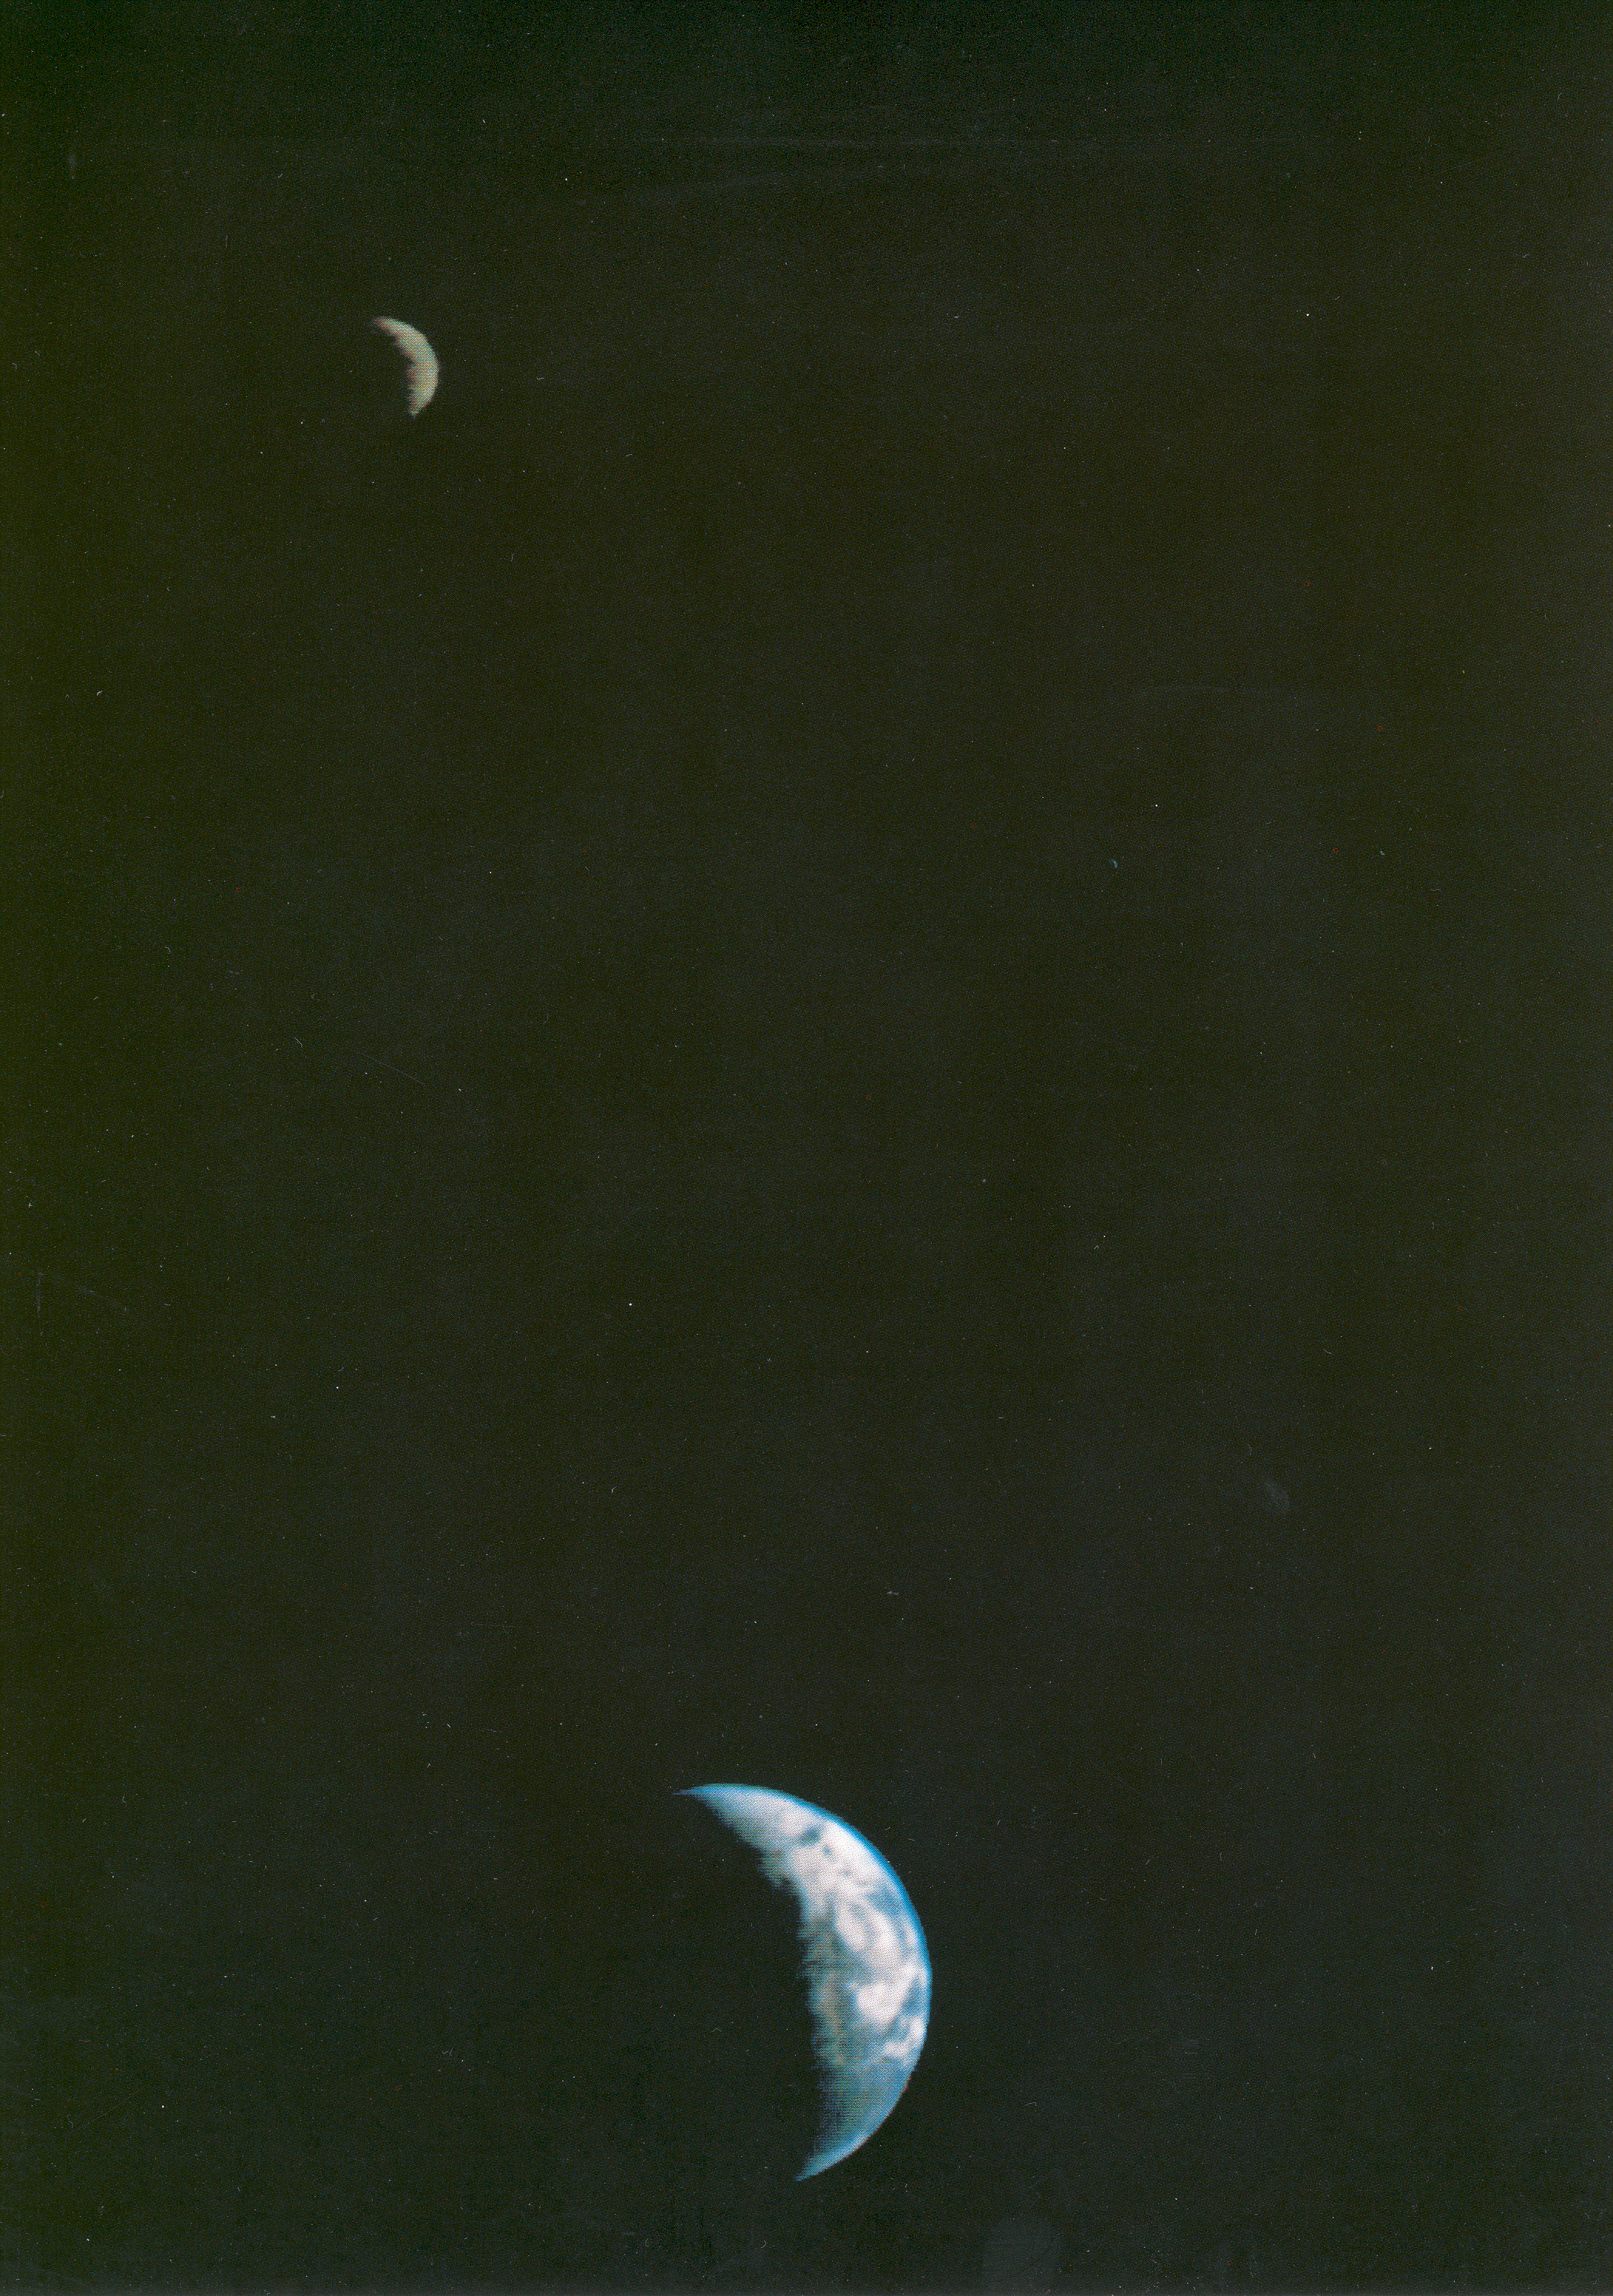 Details about   New Photo First Image of Earth & Moon in a Single Frame Voyager 1-6 Sizes! 